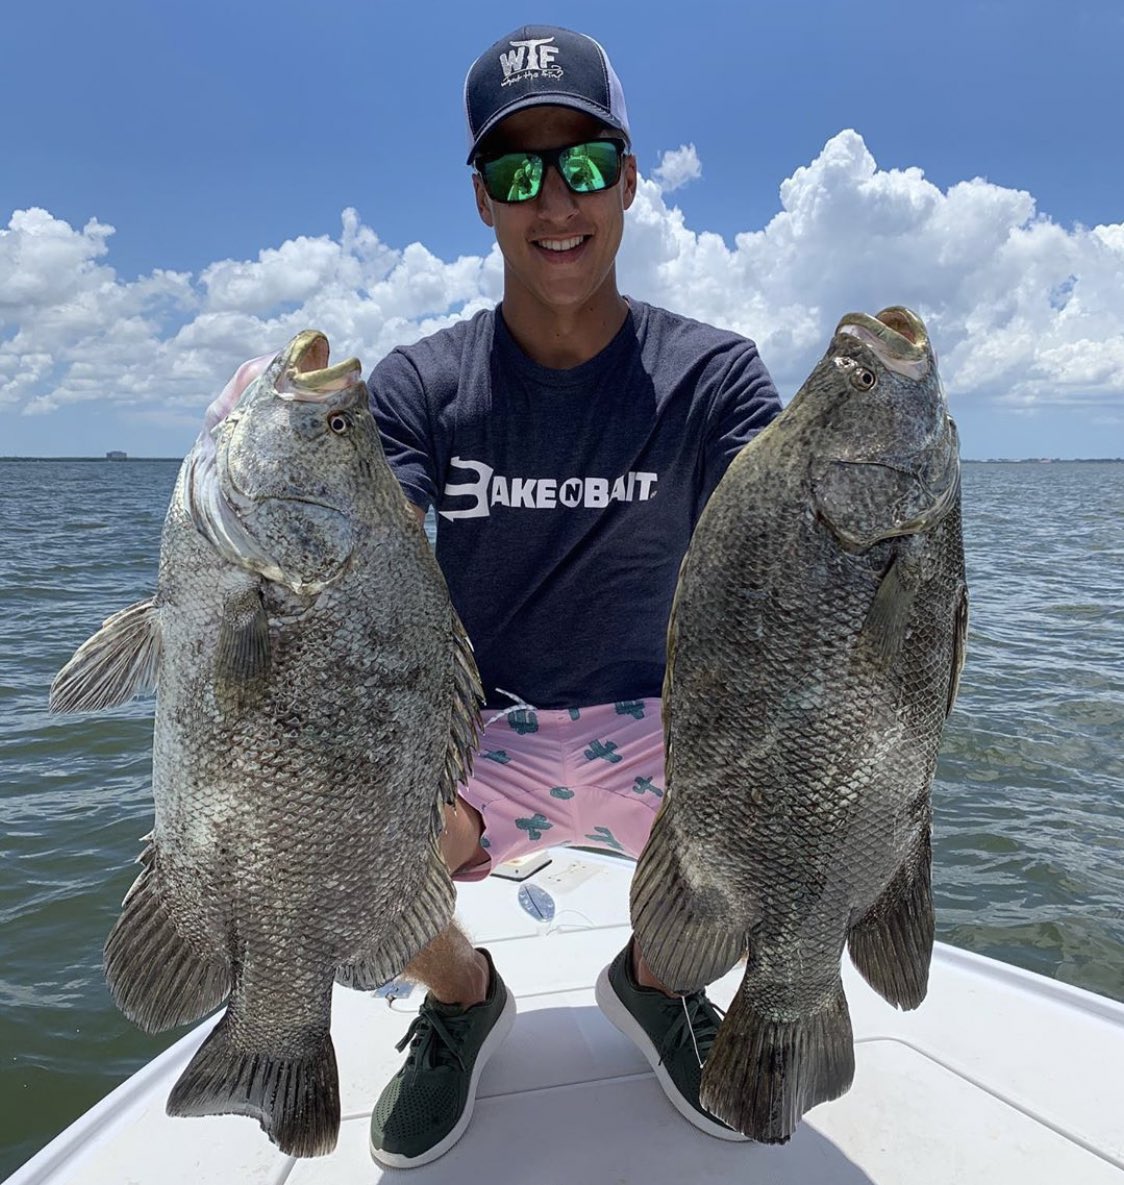 @zach_witkowski messed around and shot a triple double 🏀 

#wakenbait #tripletail #inshorefishing #floridafishing #tampabayfishing #fishing #tampabay #saltwaterfishing #lovefl #inthemeat #goodeats #getbaited